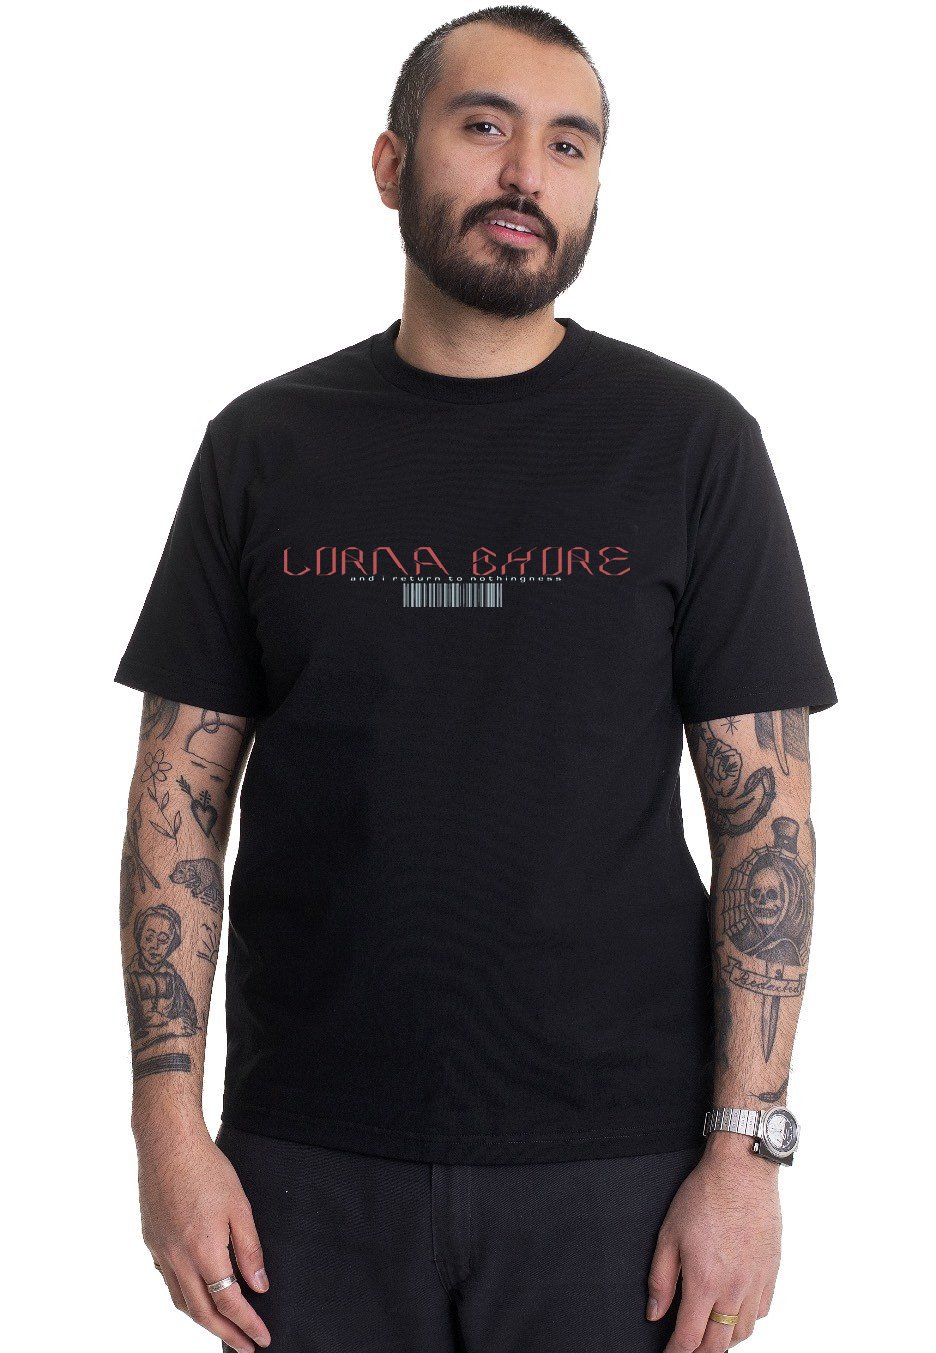 Lorna Shore - And I Return To Nothingness - T-Shirt